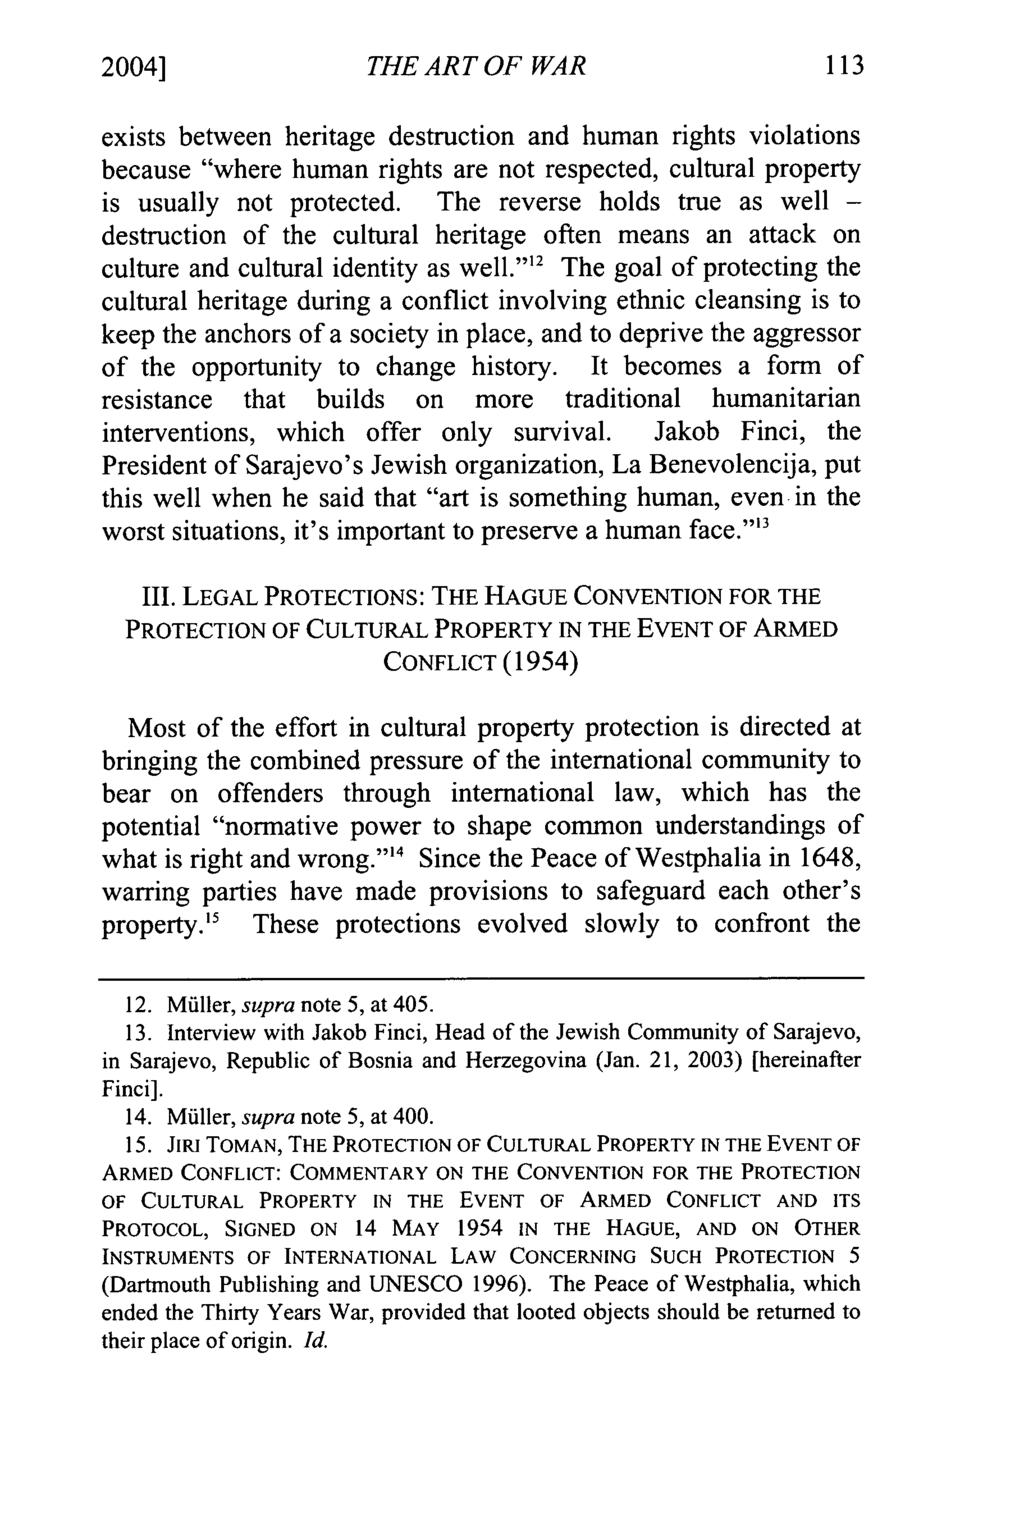 2004] Kossiakoff: The Art of THE War: The ART Protection OF WAR of Cultural Property during the "S exists between heritage destruction and human rights violations because "where human rights are not